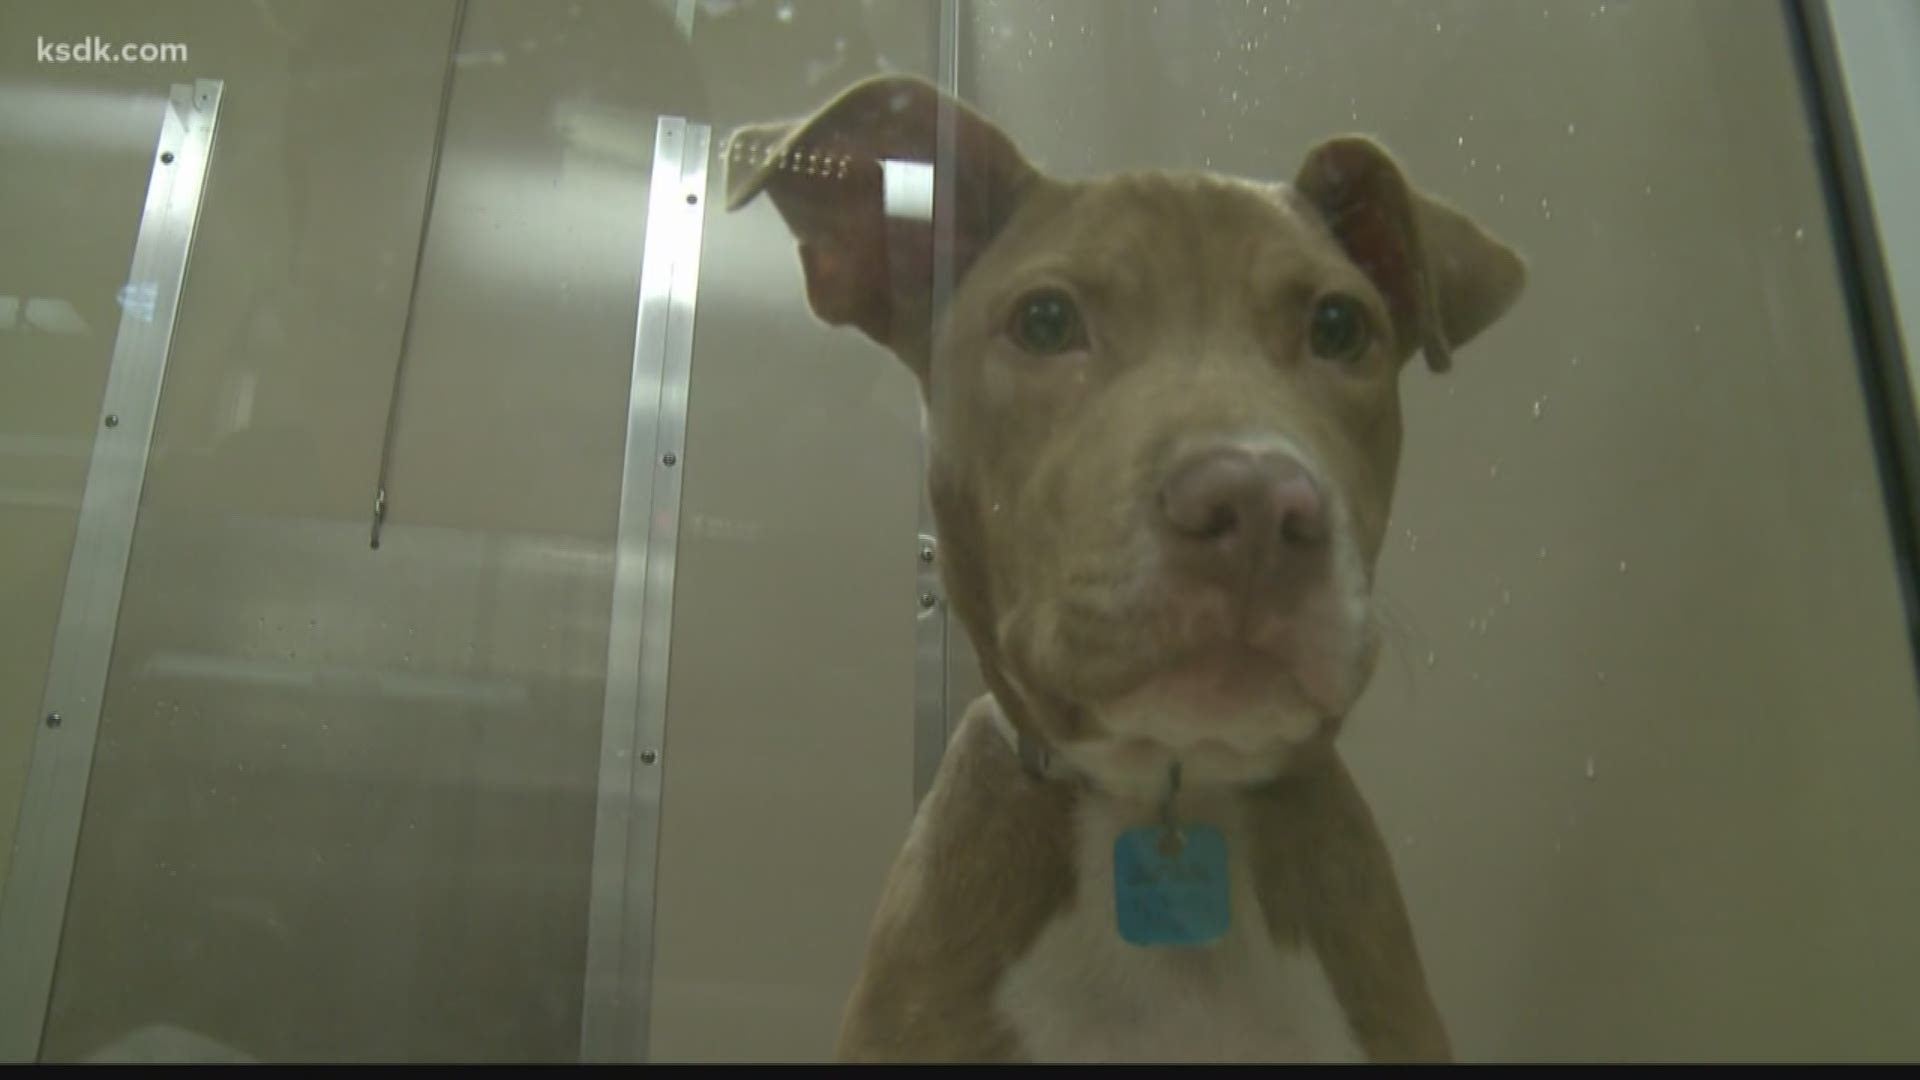 Last year, then-County Executive Steve Stenger bragged that under his control animal shelter euthanization numbers were down. But now a new audit says the opposite may be true - and pet owners may have unknowingly requested their animals be put down.